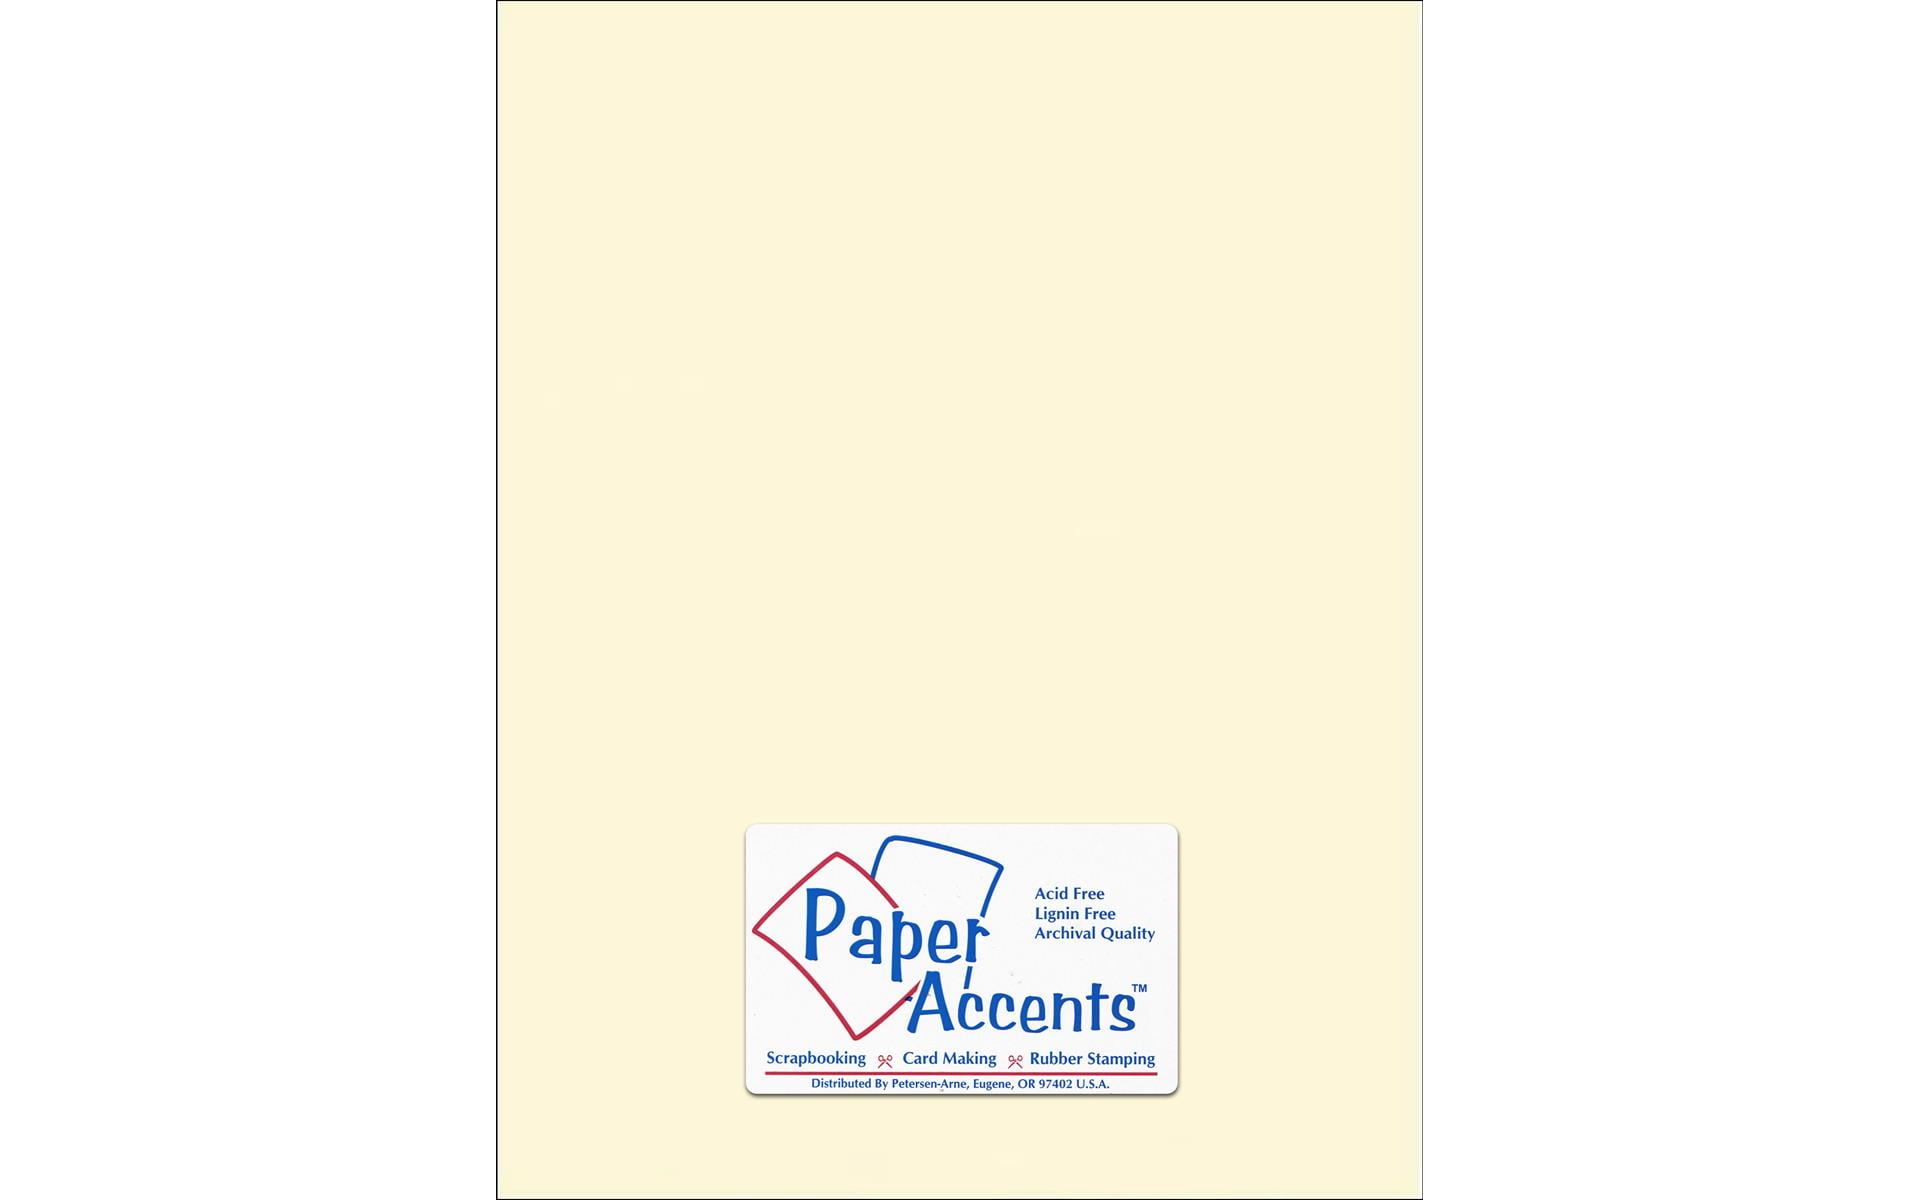 Paper Accents Cdstk Smooth 8.5x11 65lb Cream